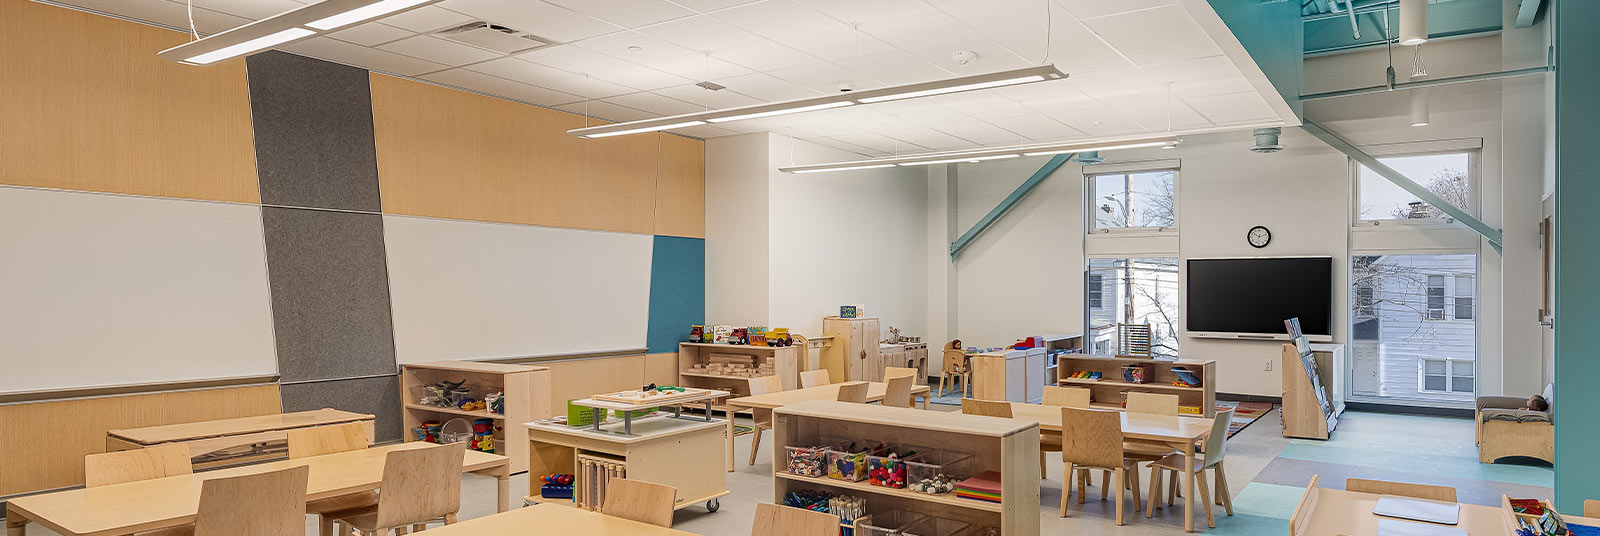 Classroom at the Westside Early Childhood Learning Center